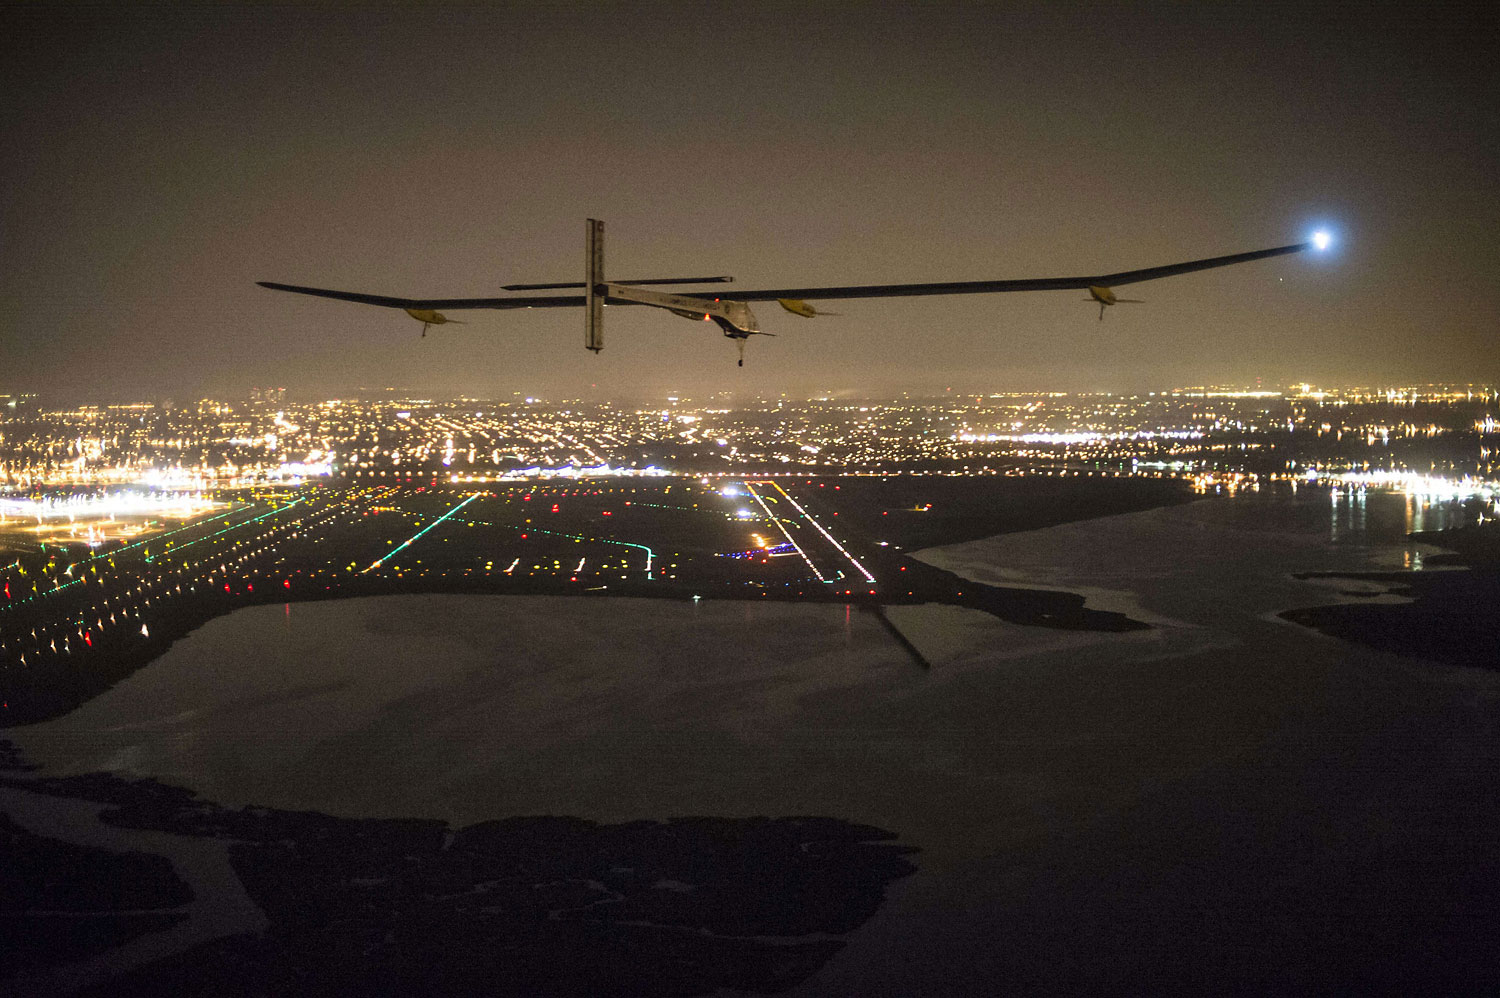 Solar Impulse, with Andre Borschberg onboard, approaches JFK airport on late July 6, 2013 in New York. The experimental Solar Impulse plane, powered by the sun, completed a transcontinental trip across the United States late Saturday, touching down in New York despite a rip in the fabric of one wing.